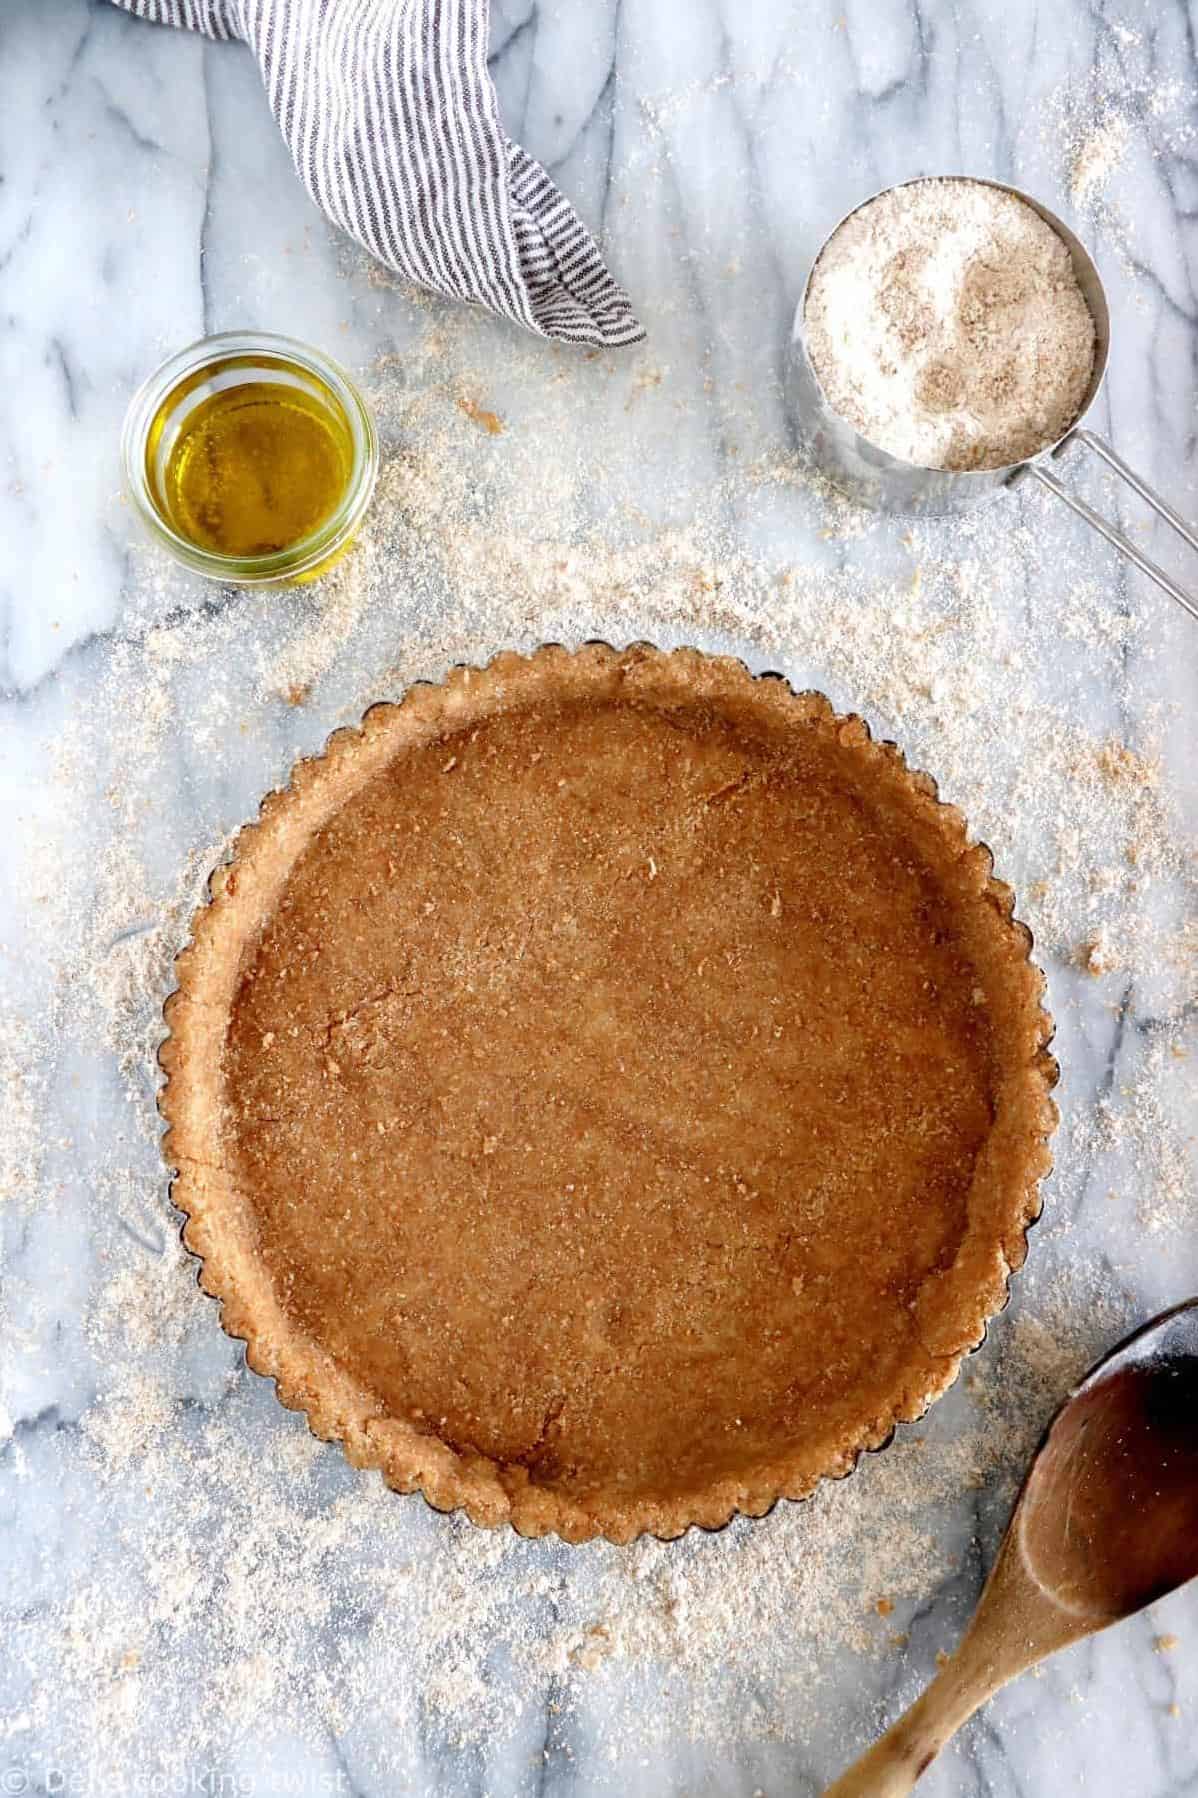  Treat your family to a healthy and yummy homemade pie.